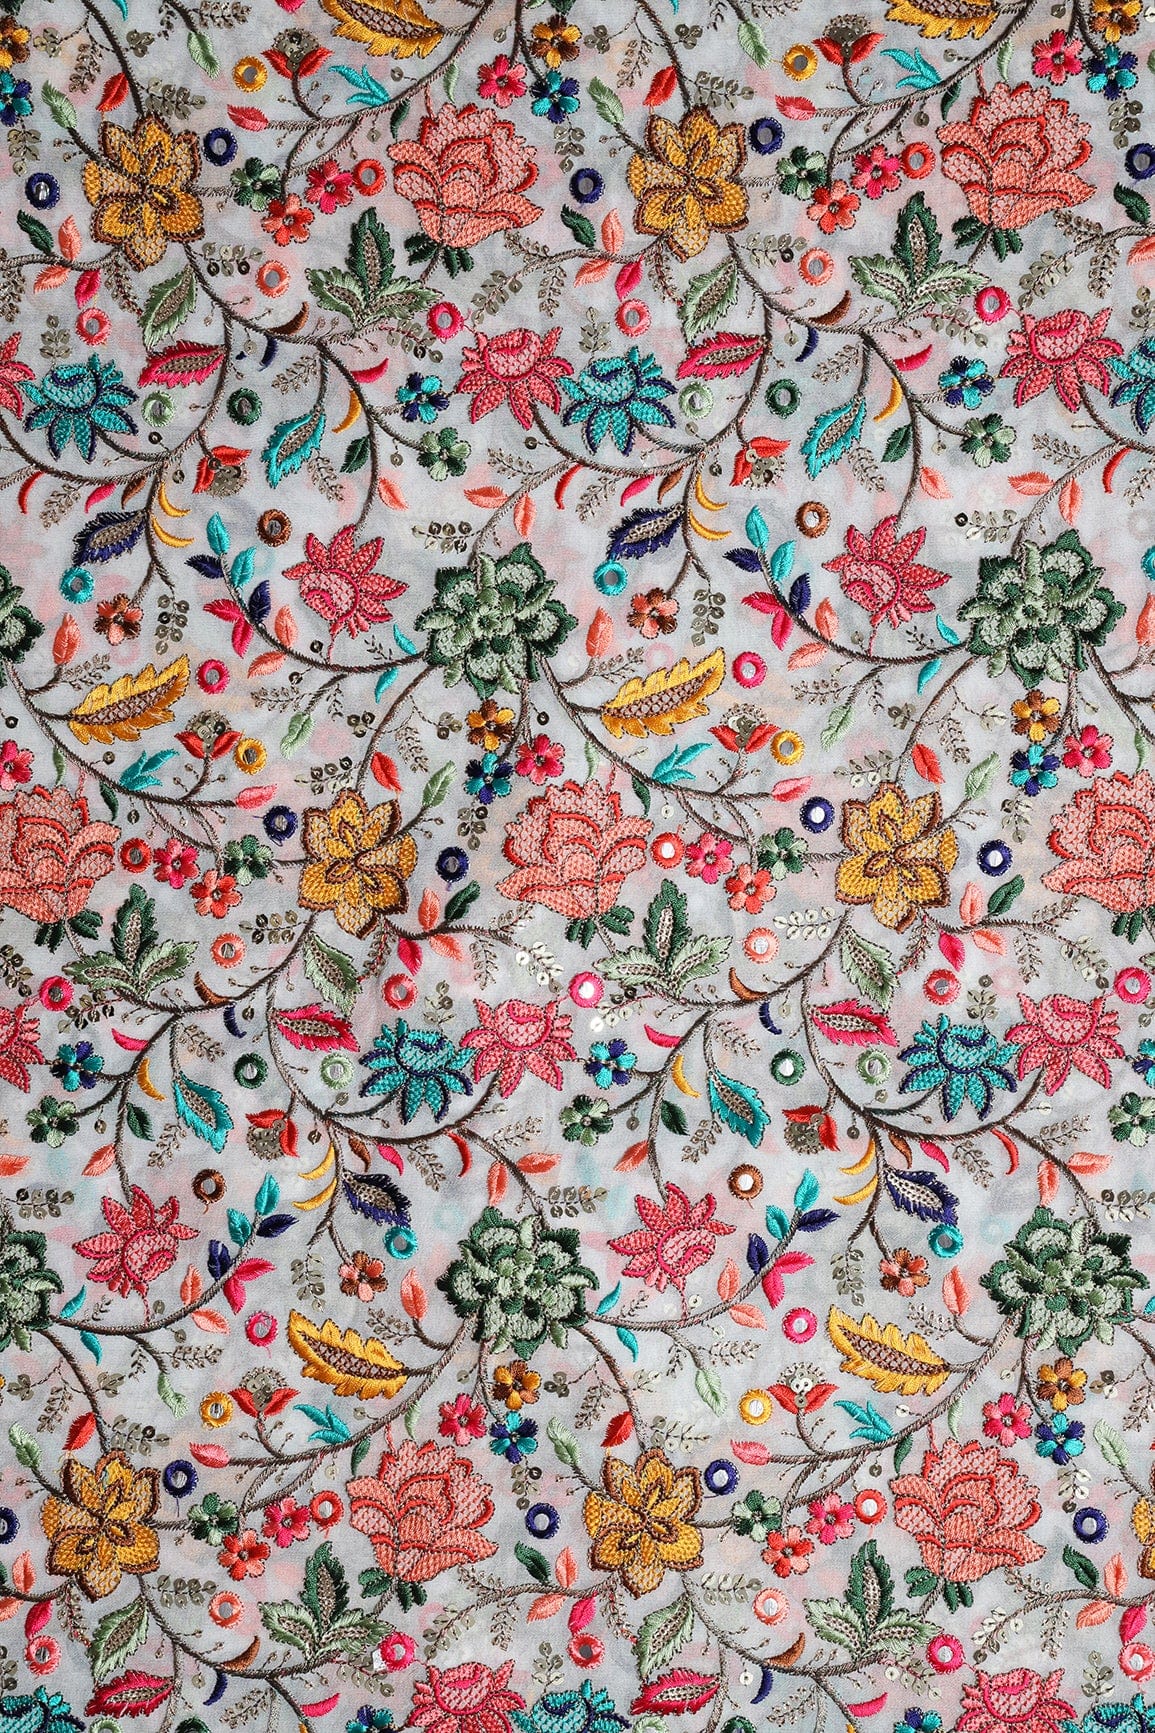 doeraa Embroidery Fabrics 1 meter Cut piece Of Multi Color Thread With Gold Sequins Exclusive Heavy Floral Embroidery On White Viscose Georgette Fabric